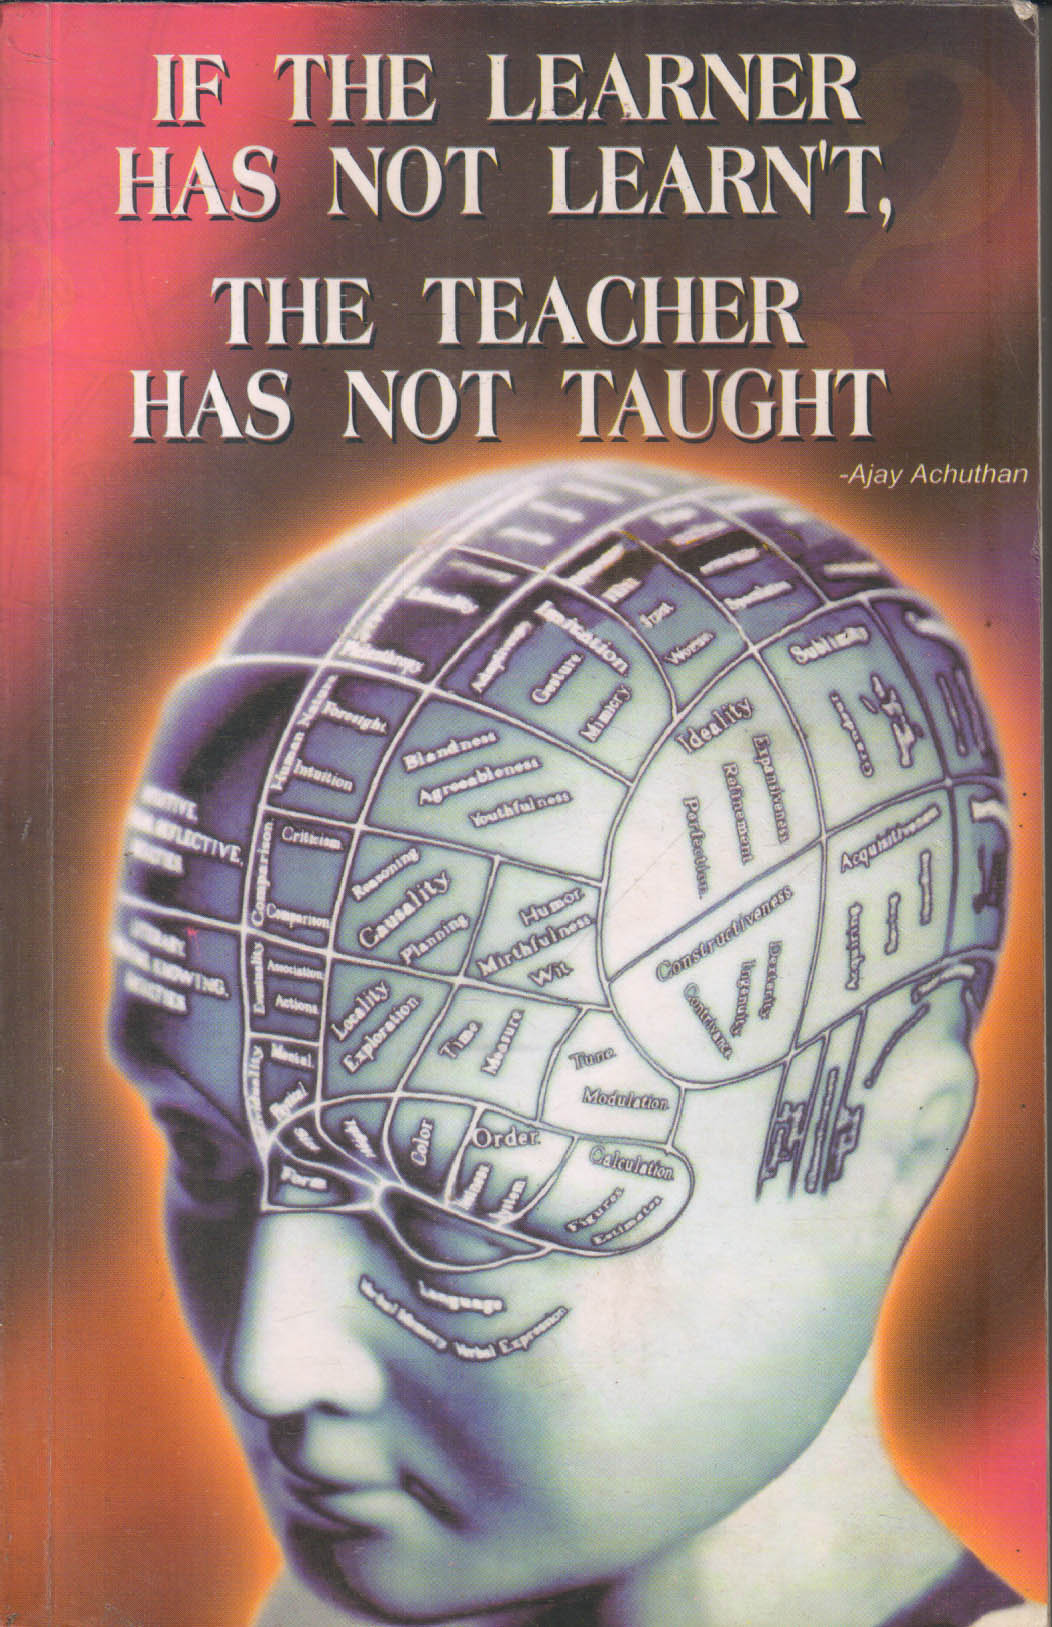 If the learner has not learnt the teacher has not taught